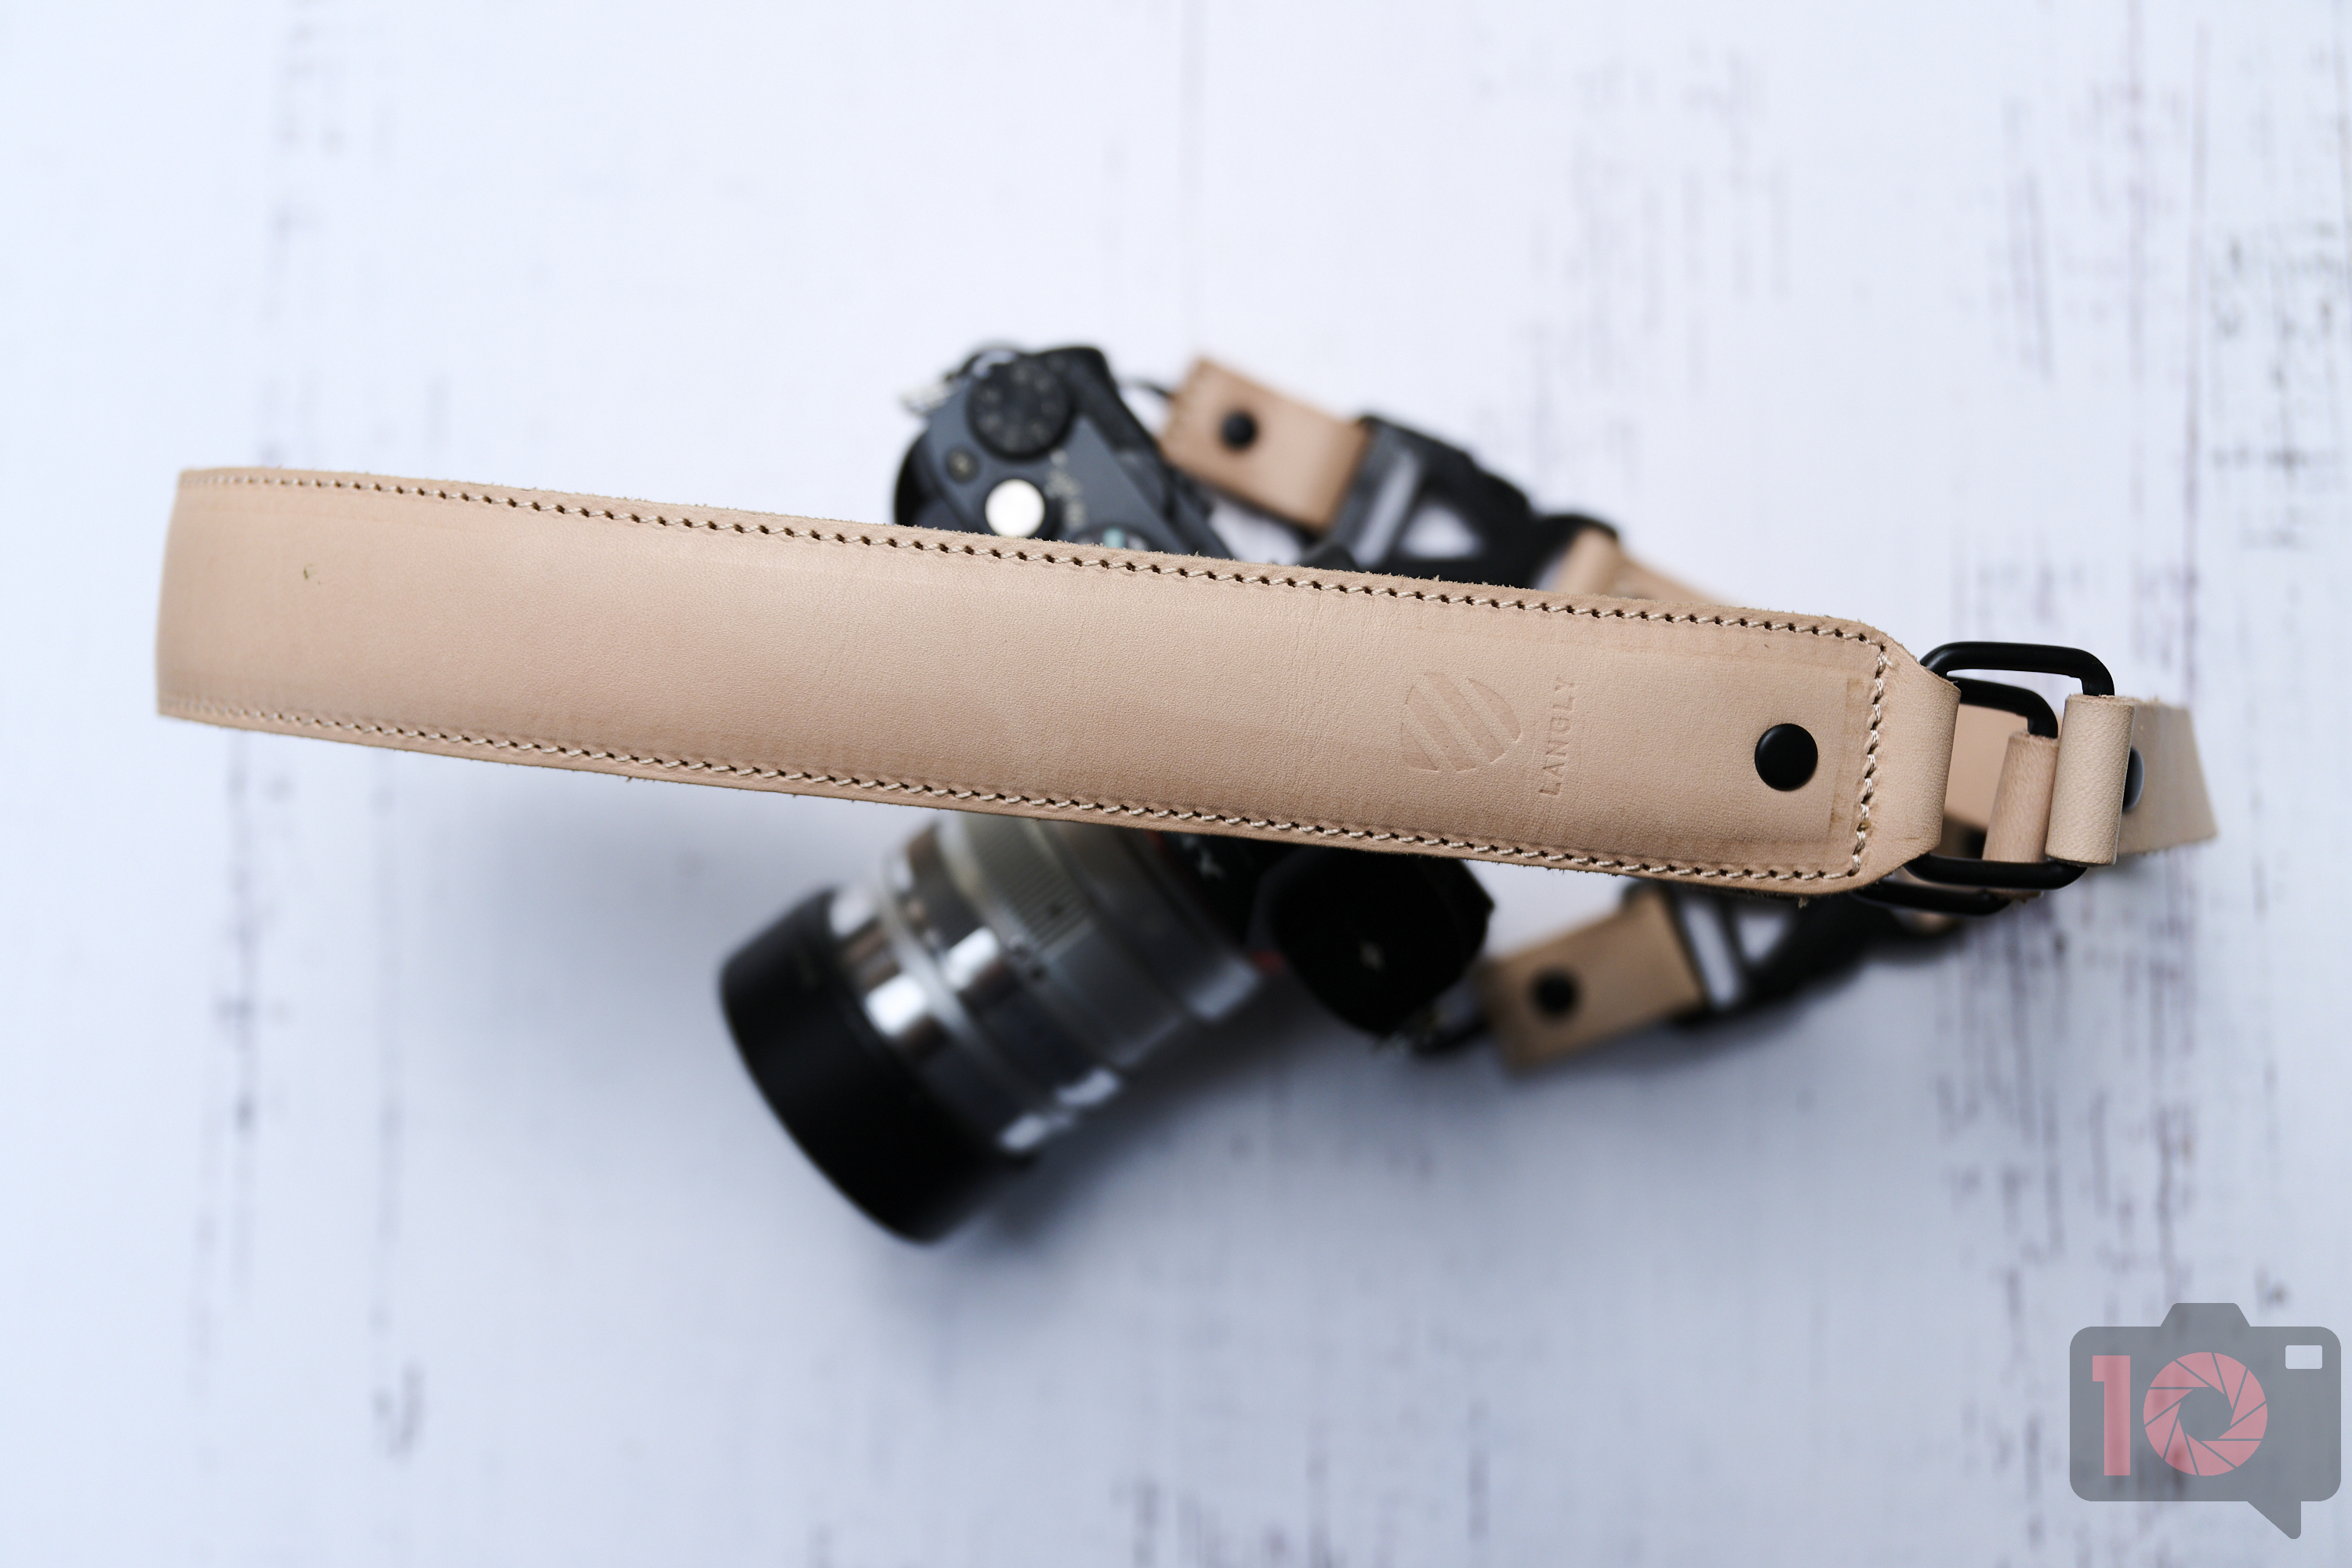 Langly Premium Leather Camera Strap – Langly Co